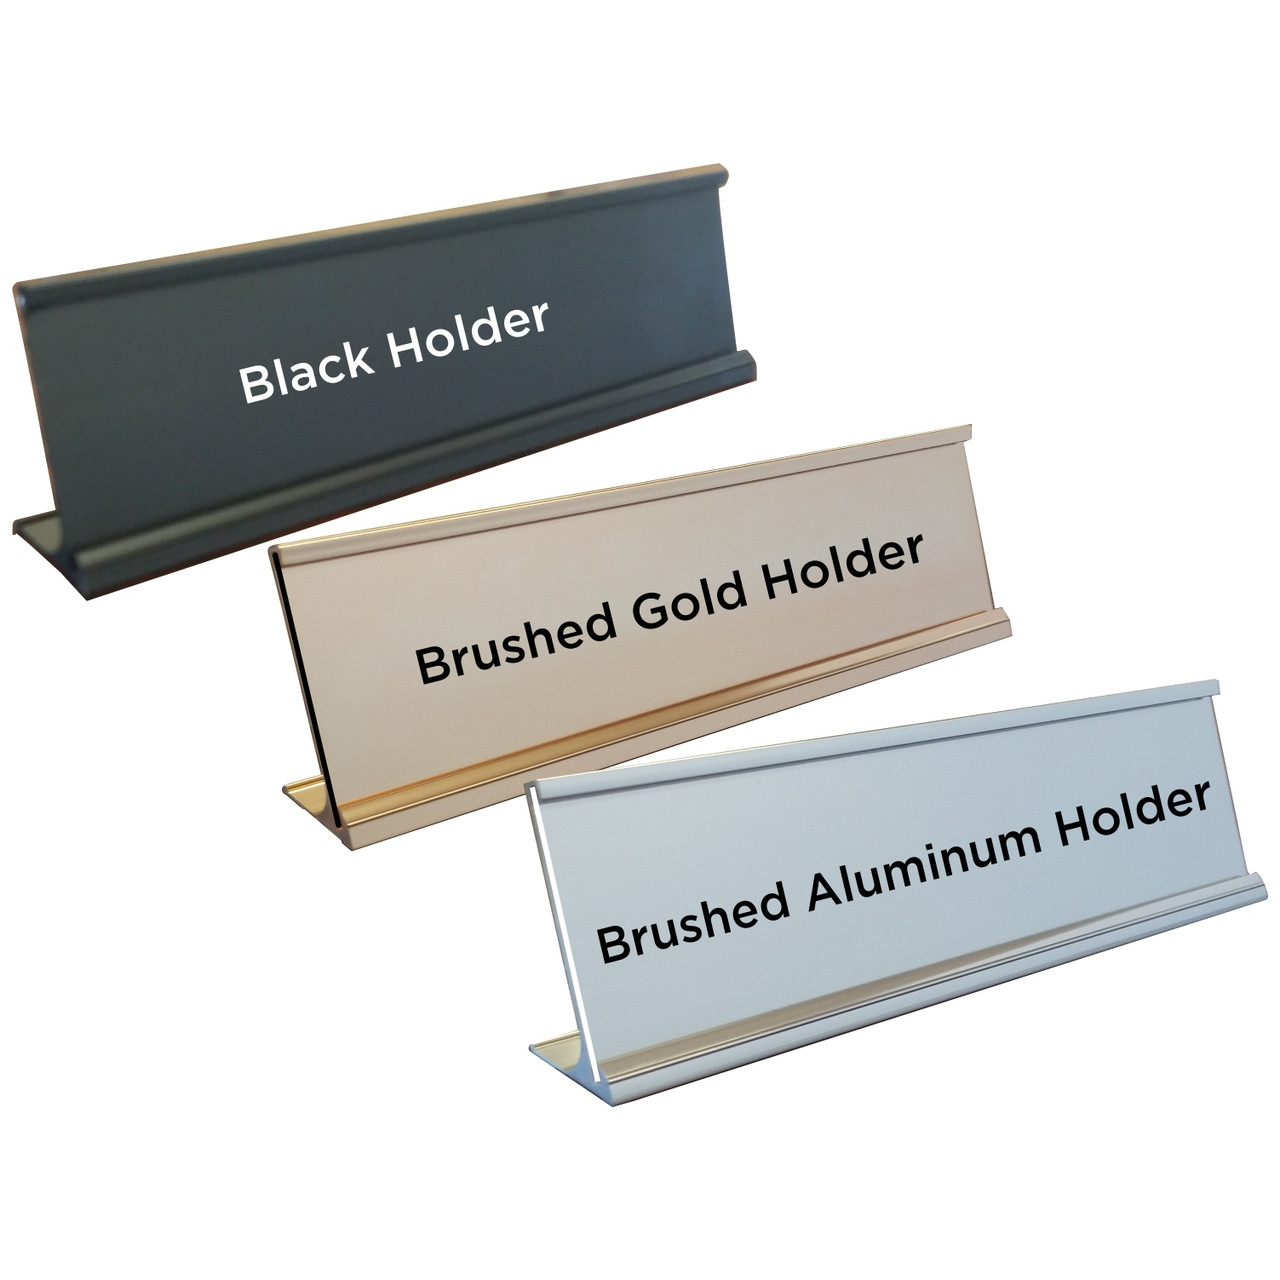 GM 4 Brand Name Plates with Optional Holder